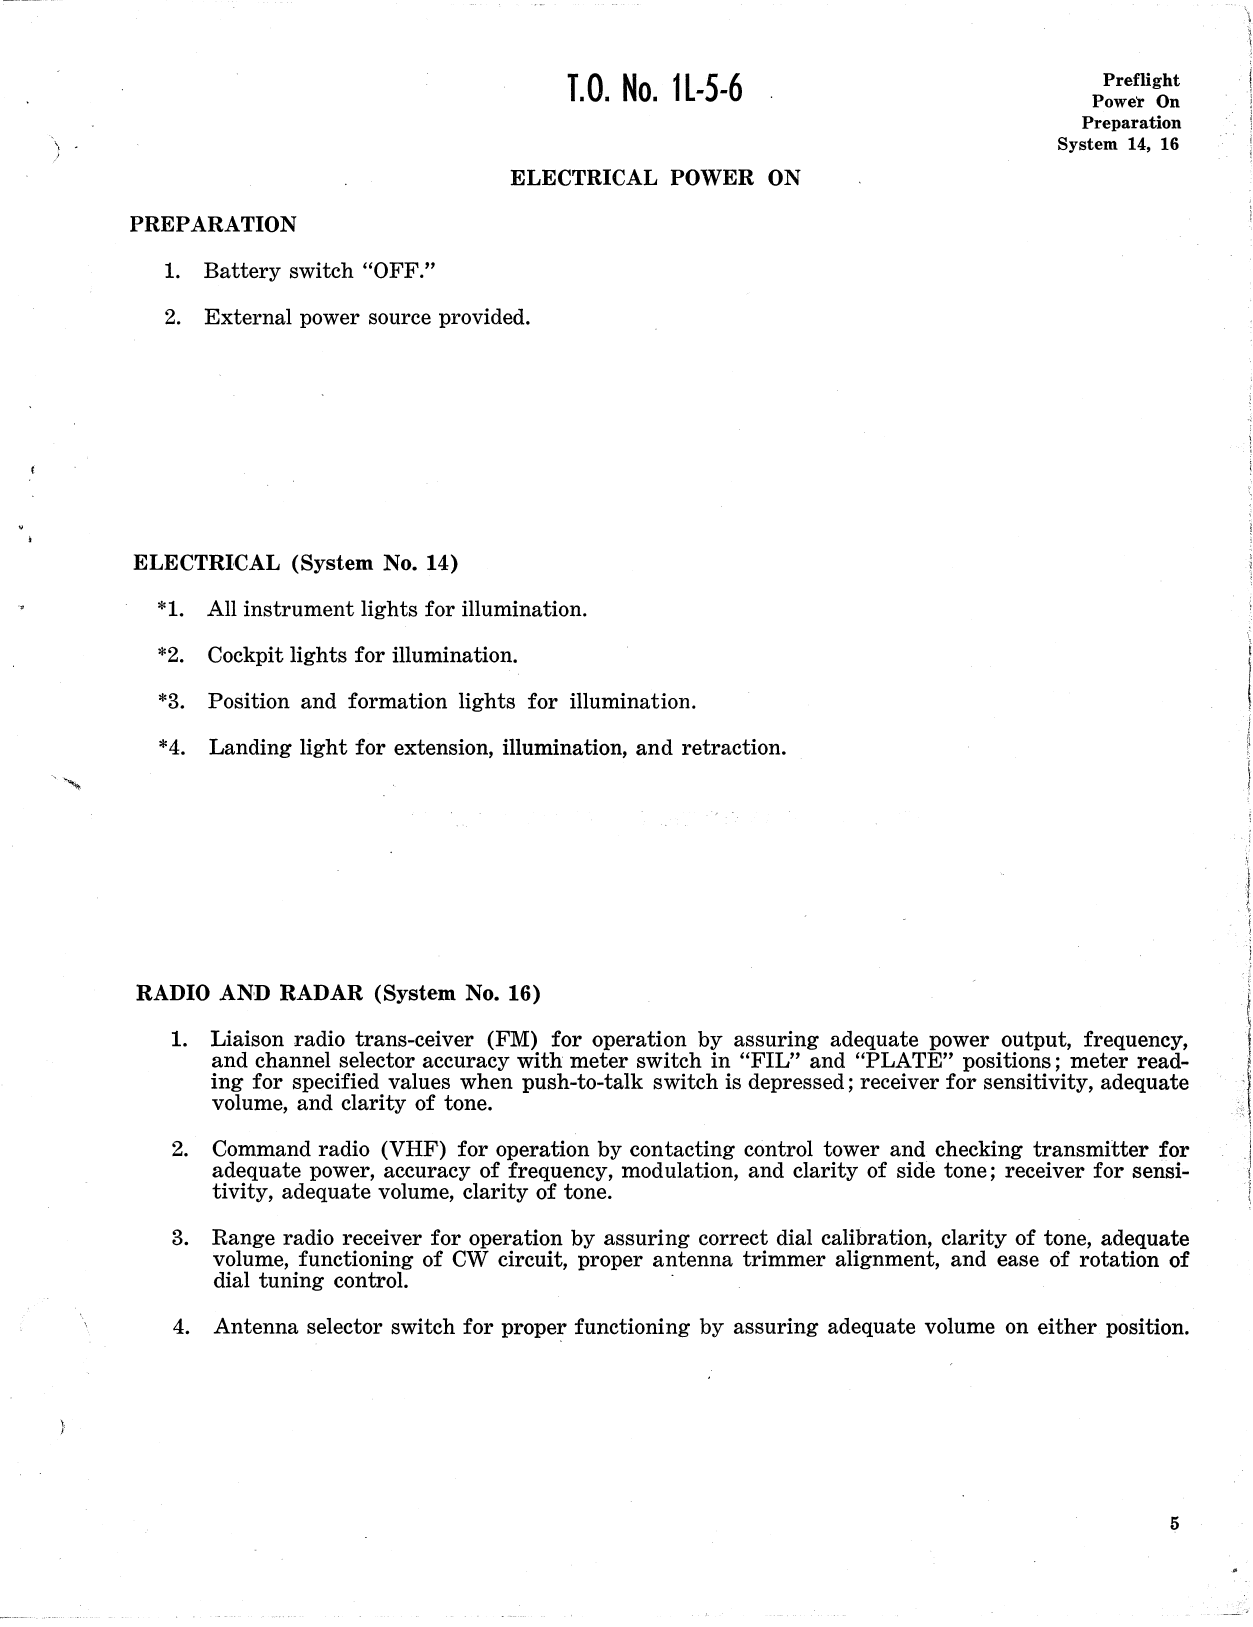 Sample page 8 from AirCorps Library document: Inspection Requirements - L-5, OY-1, OY-2